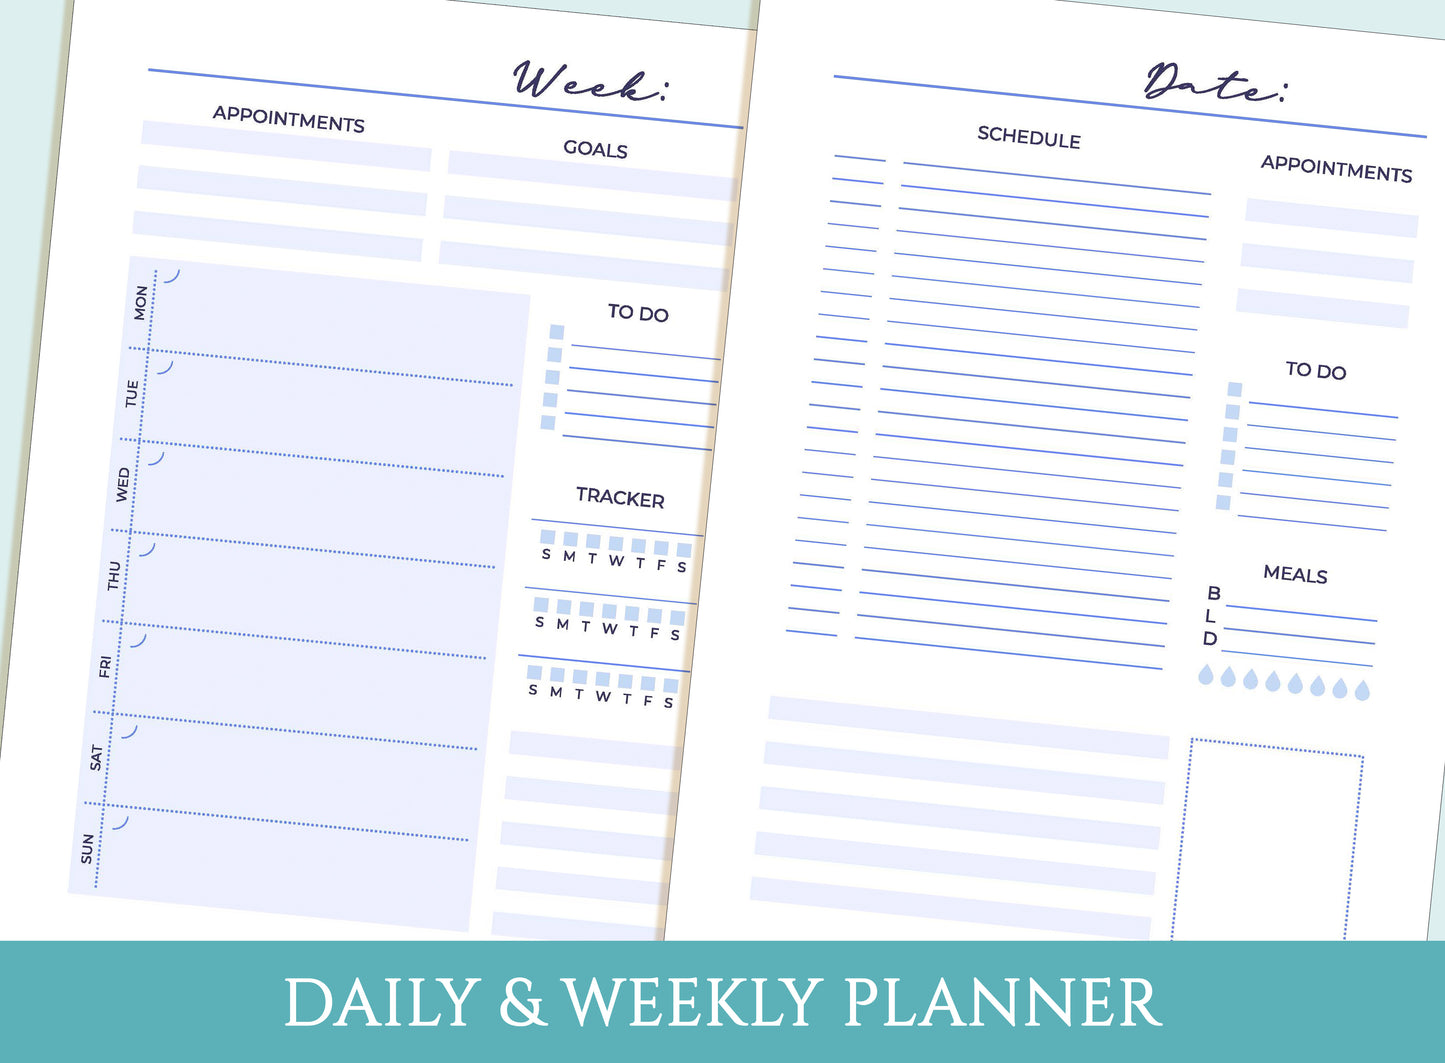 2024 Printable Planner, Minimalist, Daily Weekly Monthly Yearly, A4 A5 Letter Size, Goal Planner, To Do List, Habit Tracker, Planner Inserts